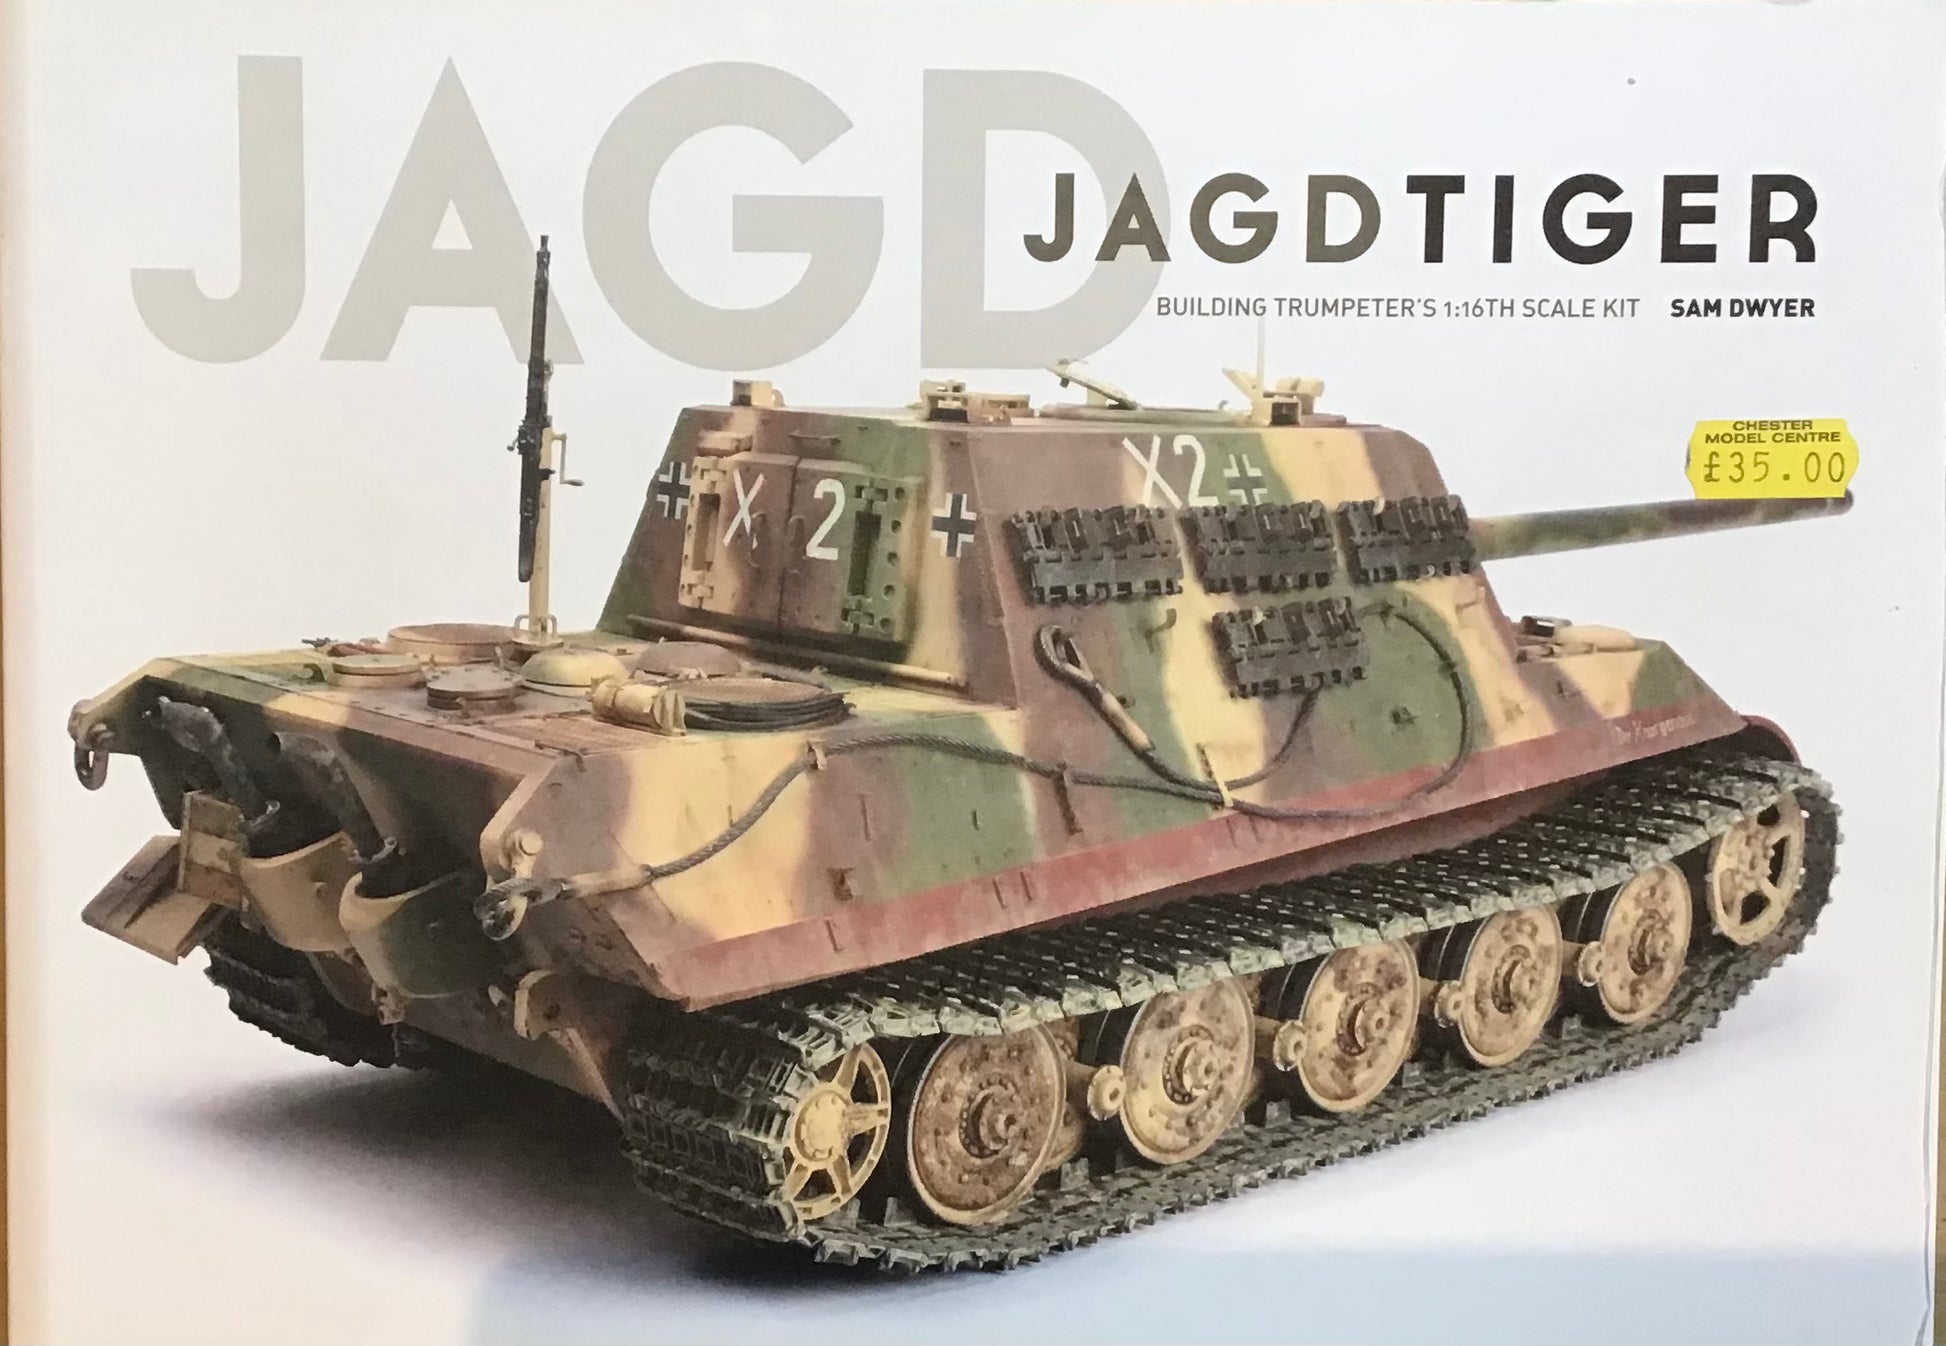 Jagdtiger: Building Trumpeter's 1:16th Scale Kit by Sam Dwyer - Chester Model Centre